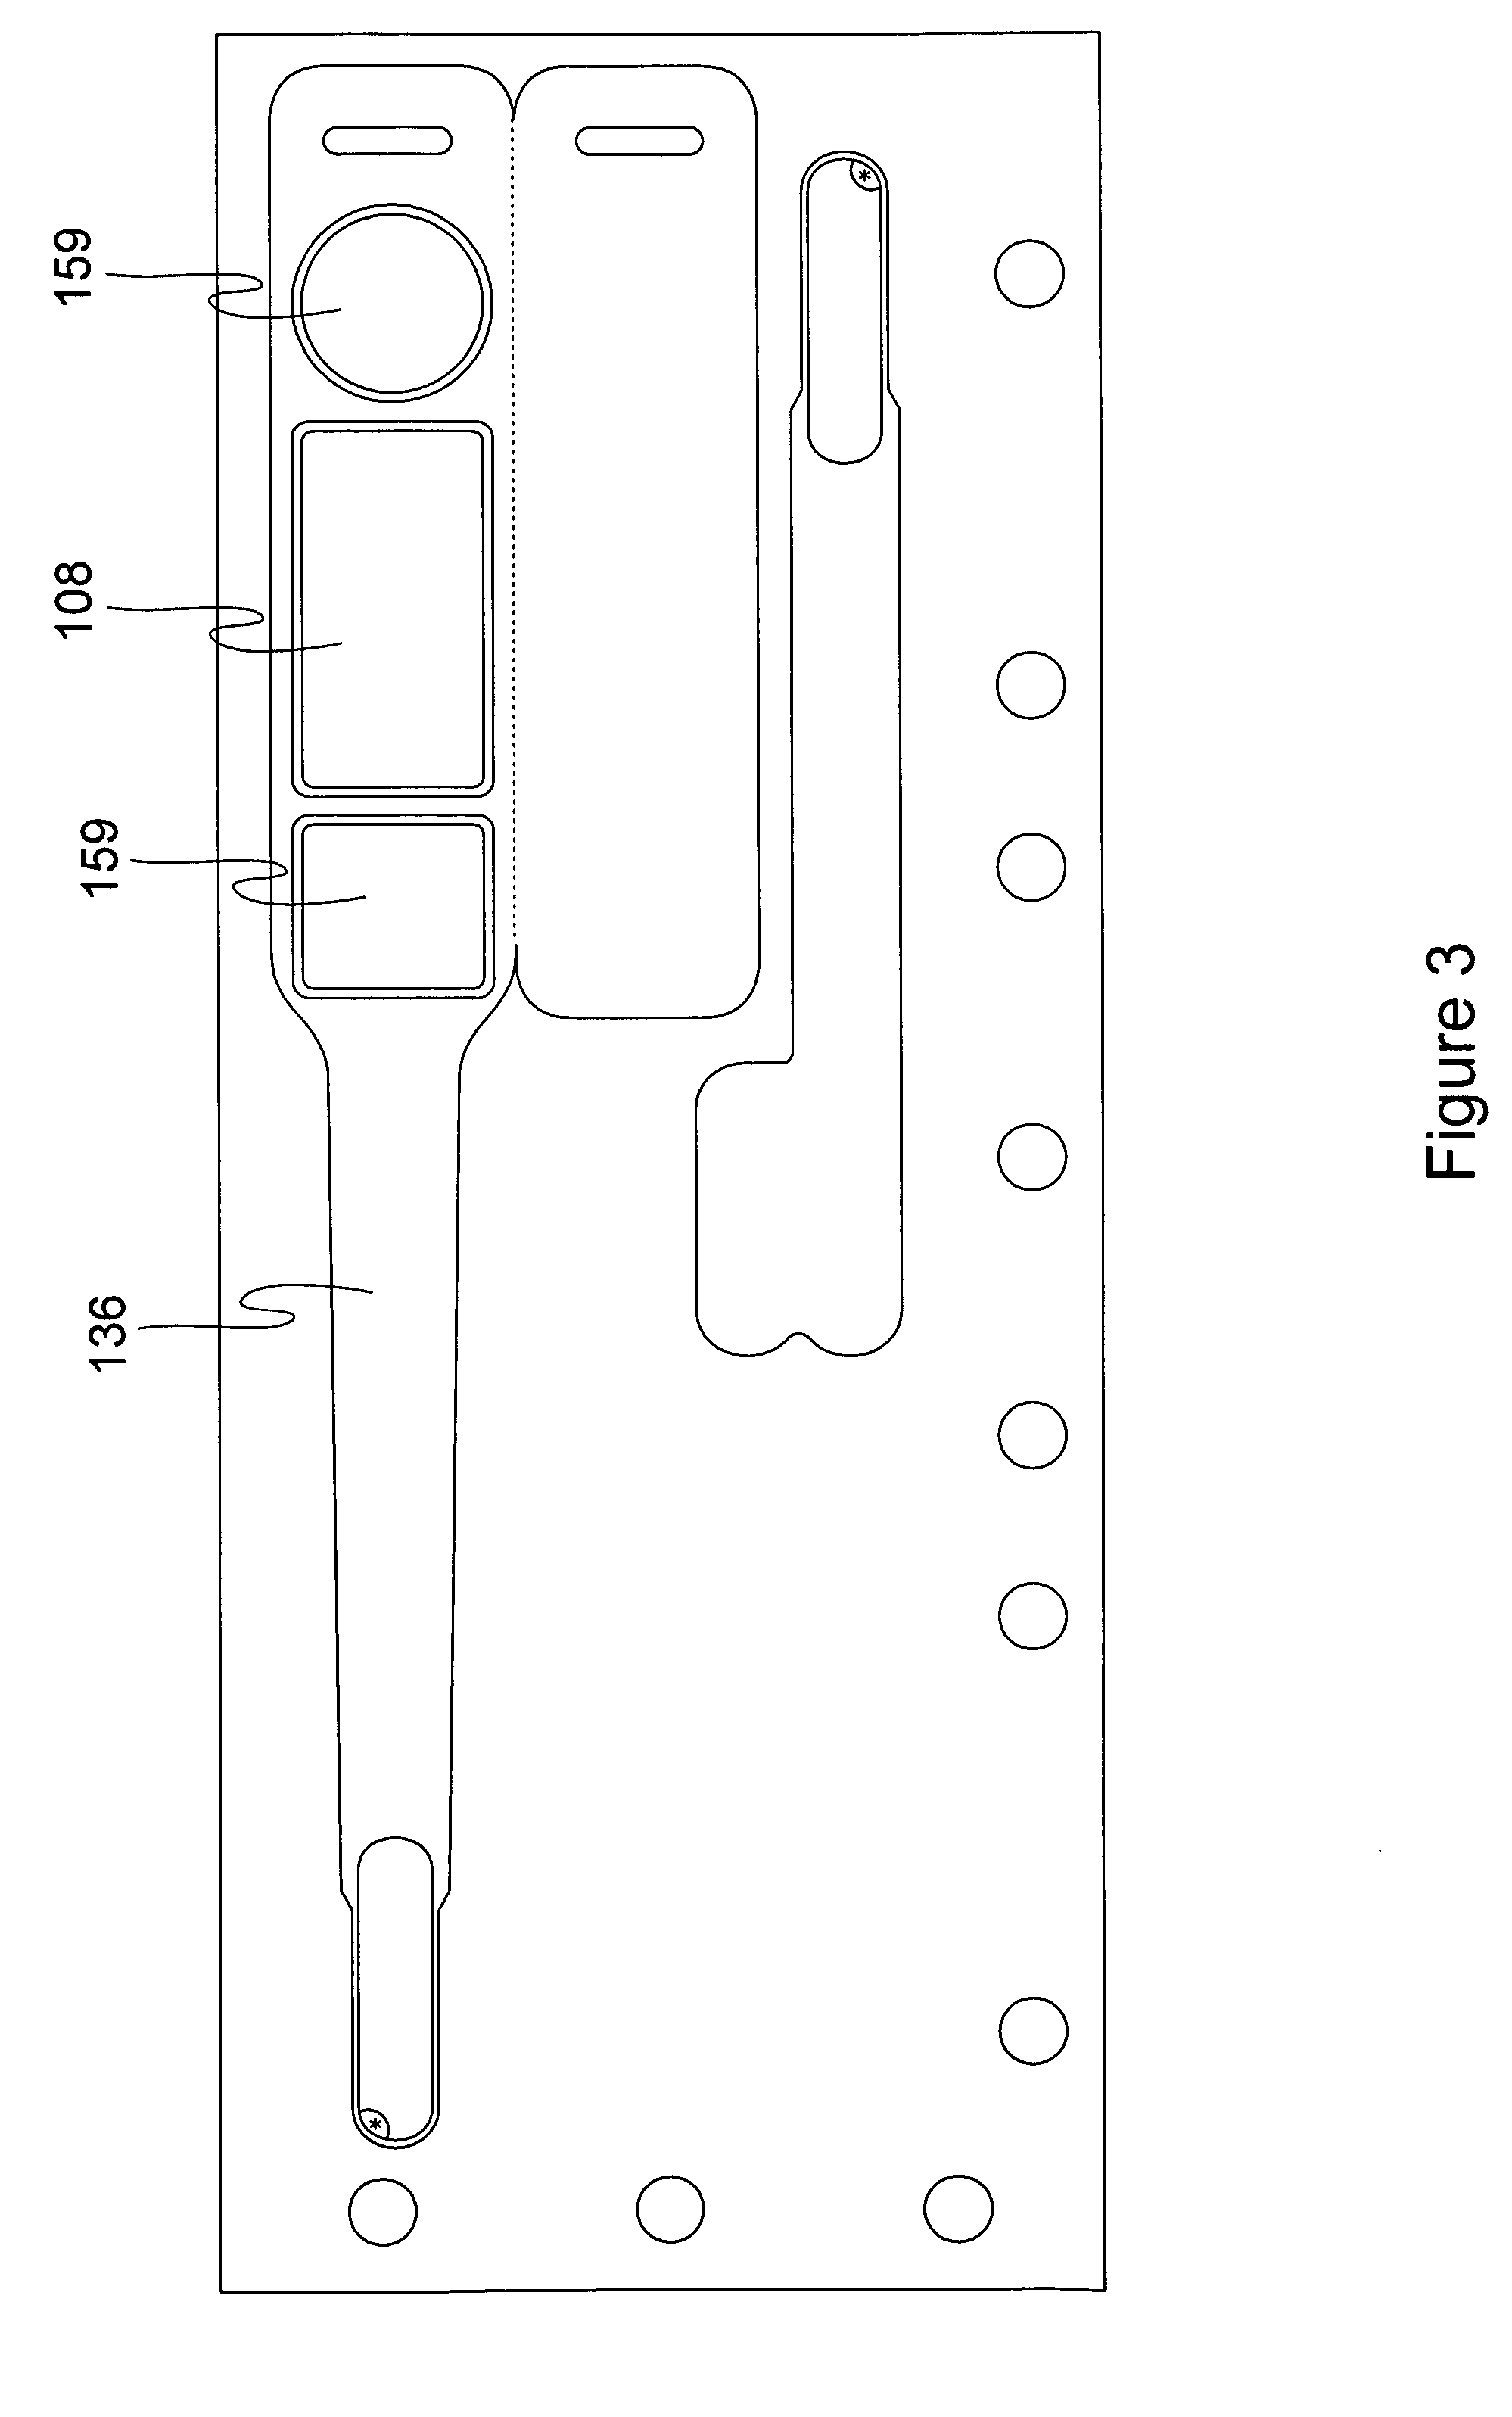 Business form comprising a wristband with multiple imaging areas